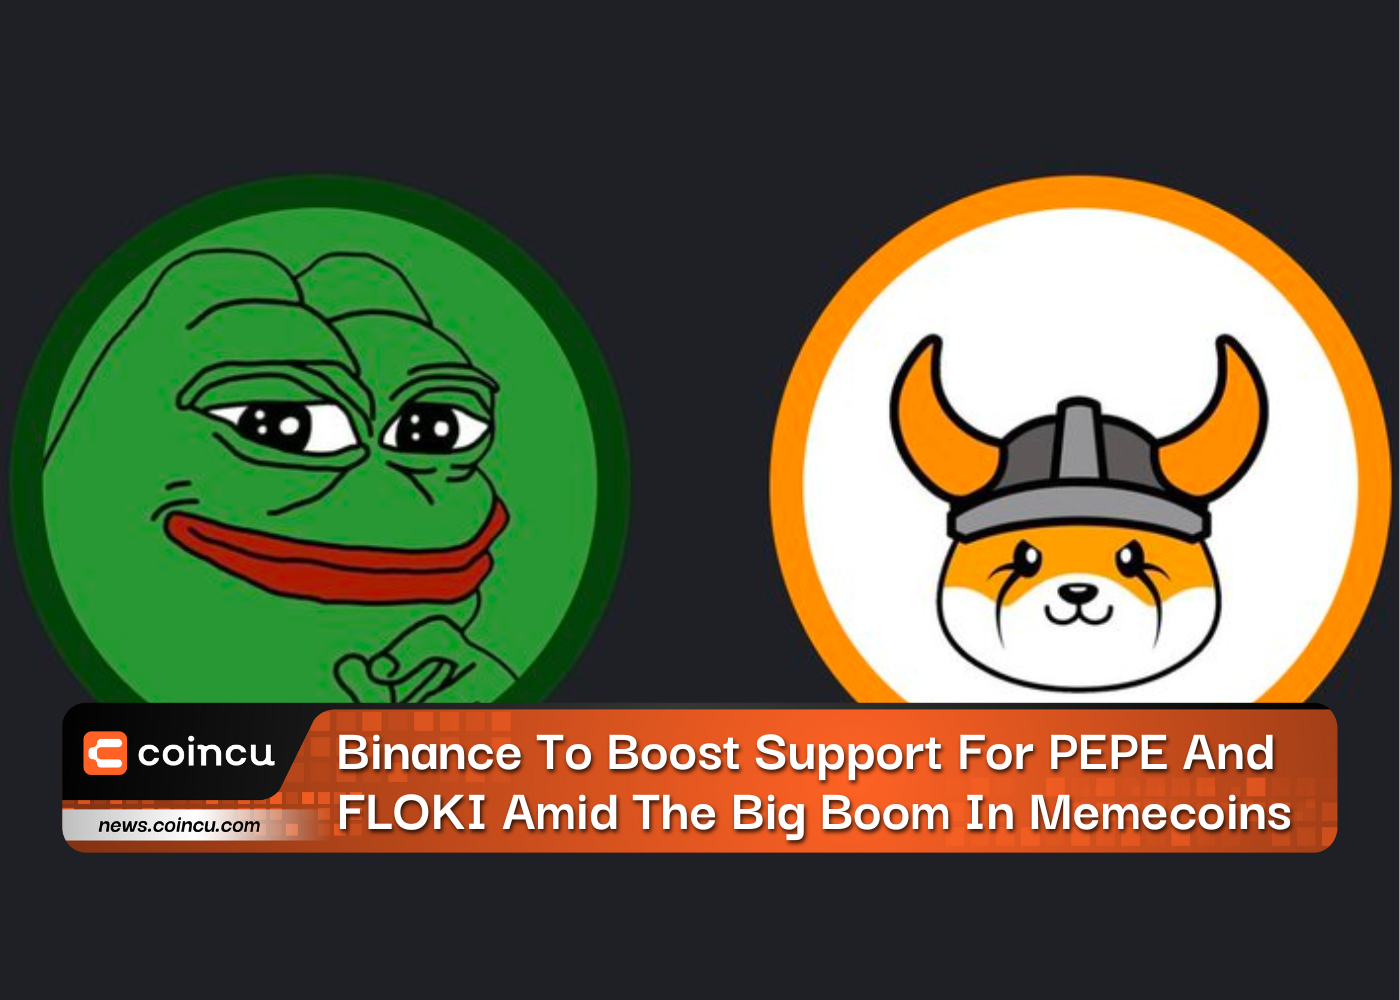 Binance To Boost Support For PEPE And FLOKI Amid The Big Boom In Memecoins